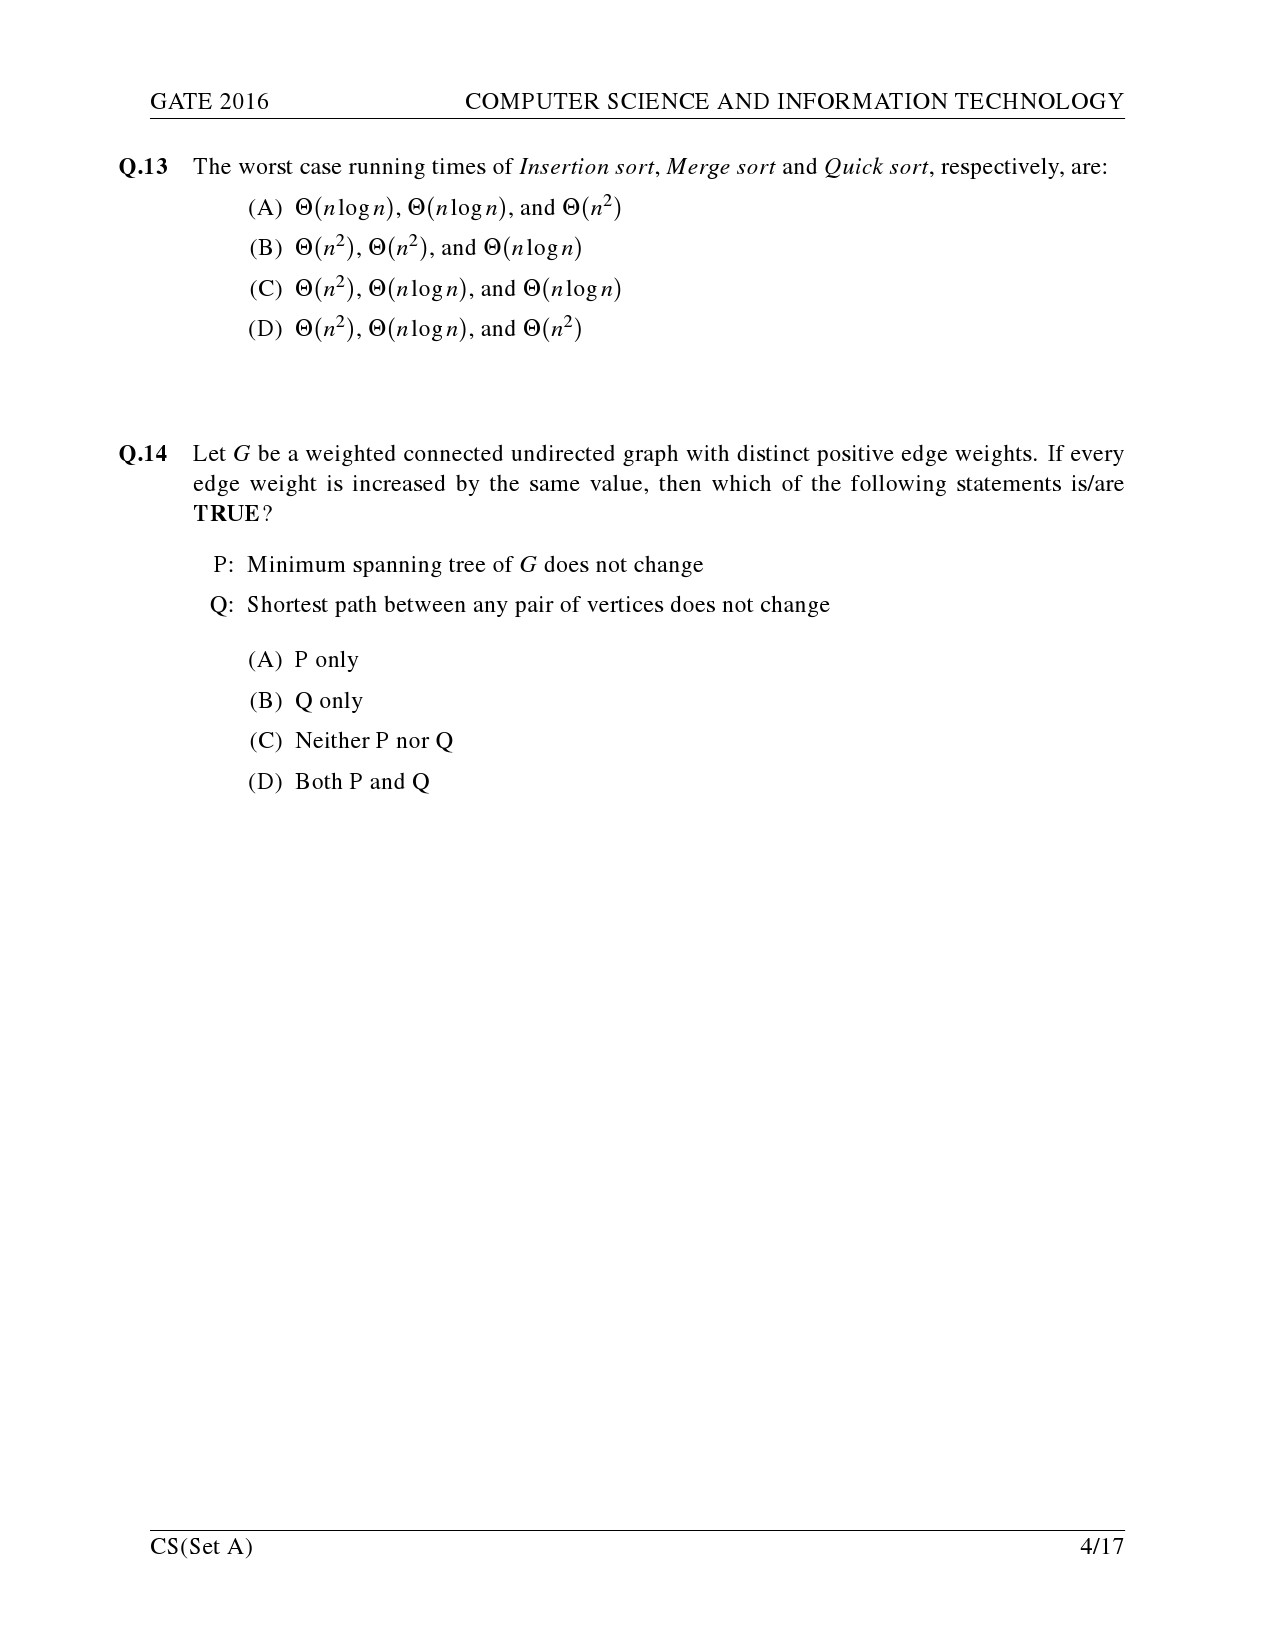 GATE Exam Question Paper 2016 Computer Science and Information Technology Set A 7